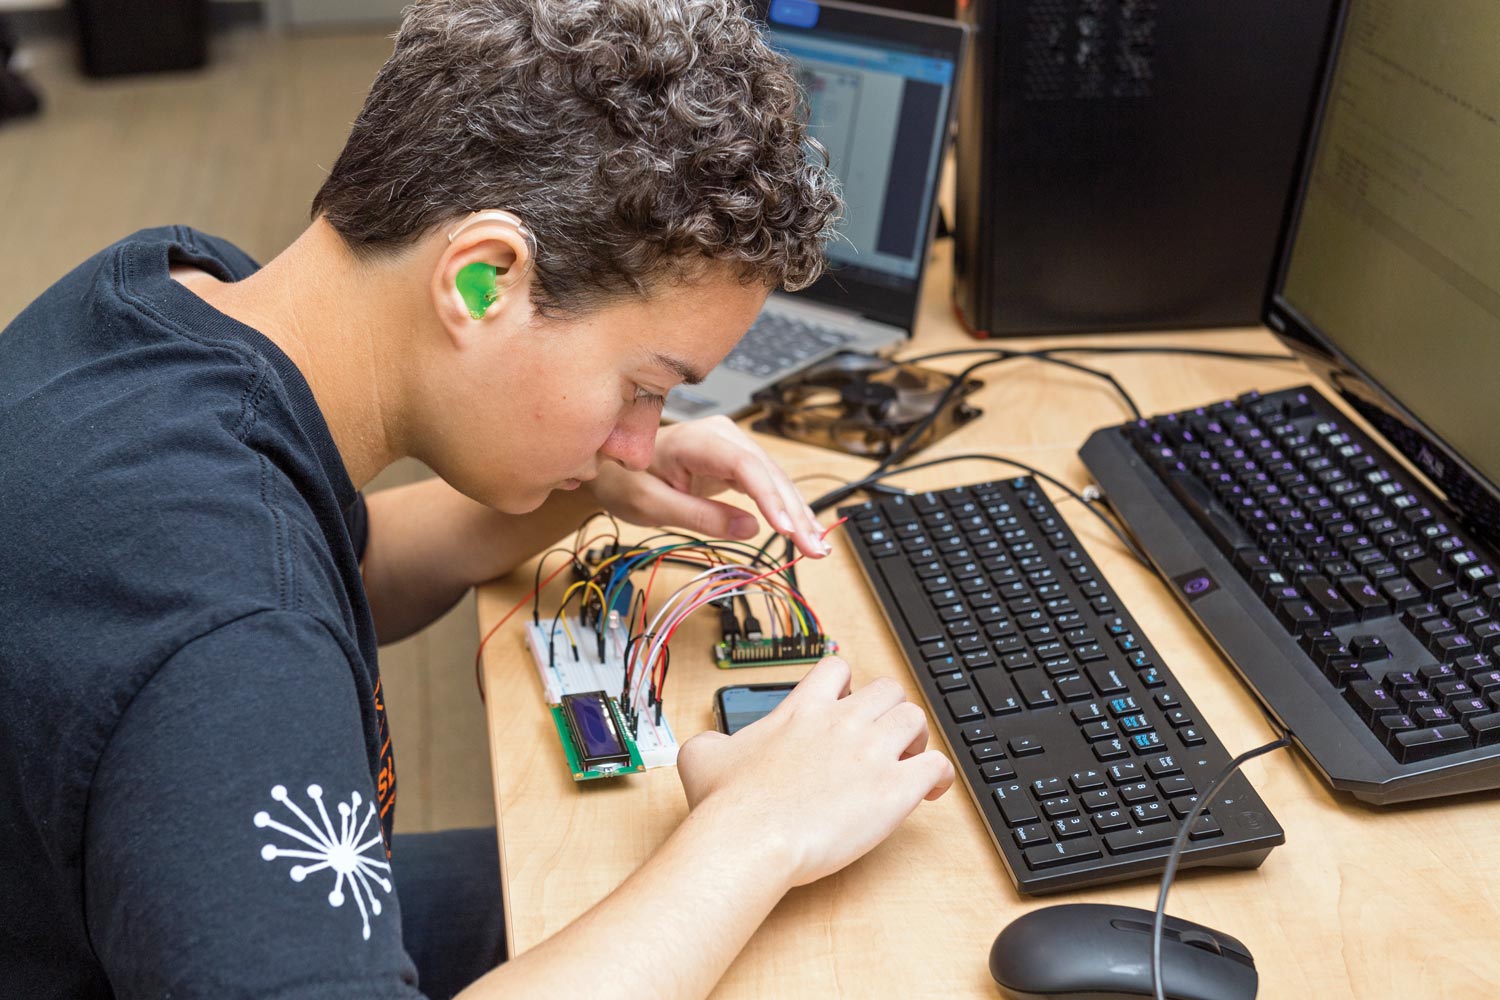 A student works at a computer developing a mobile app for a smart phone.